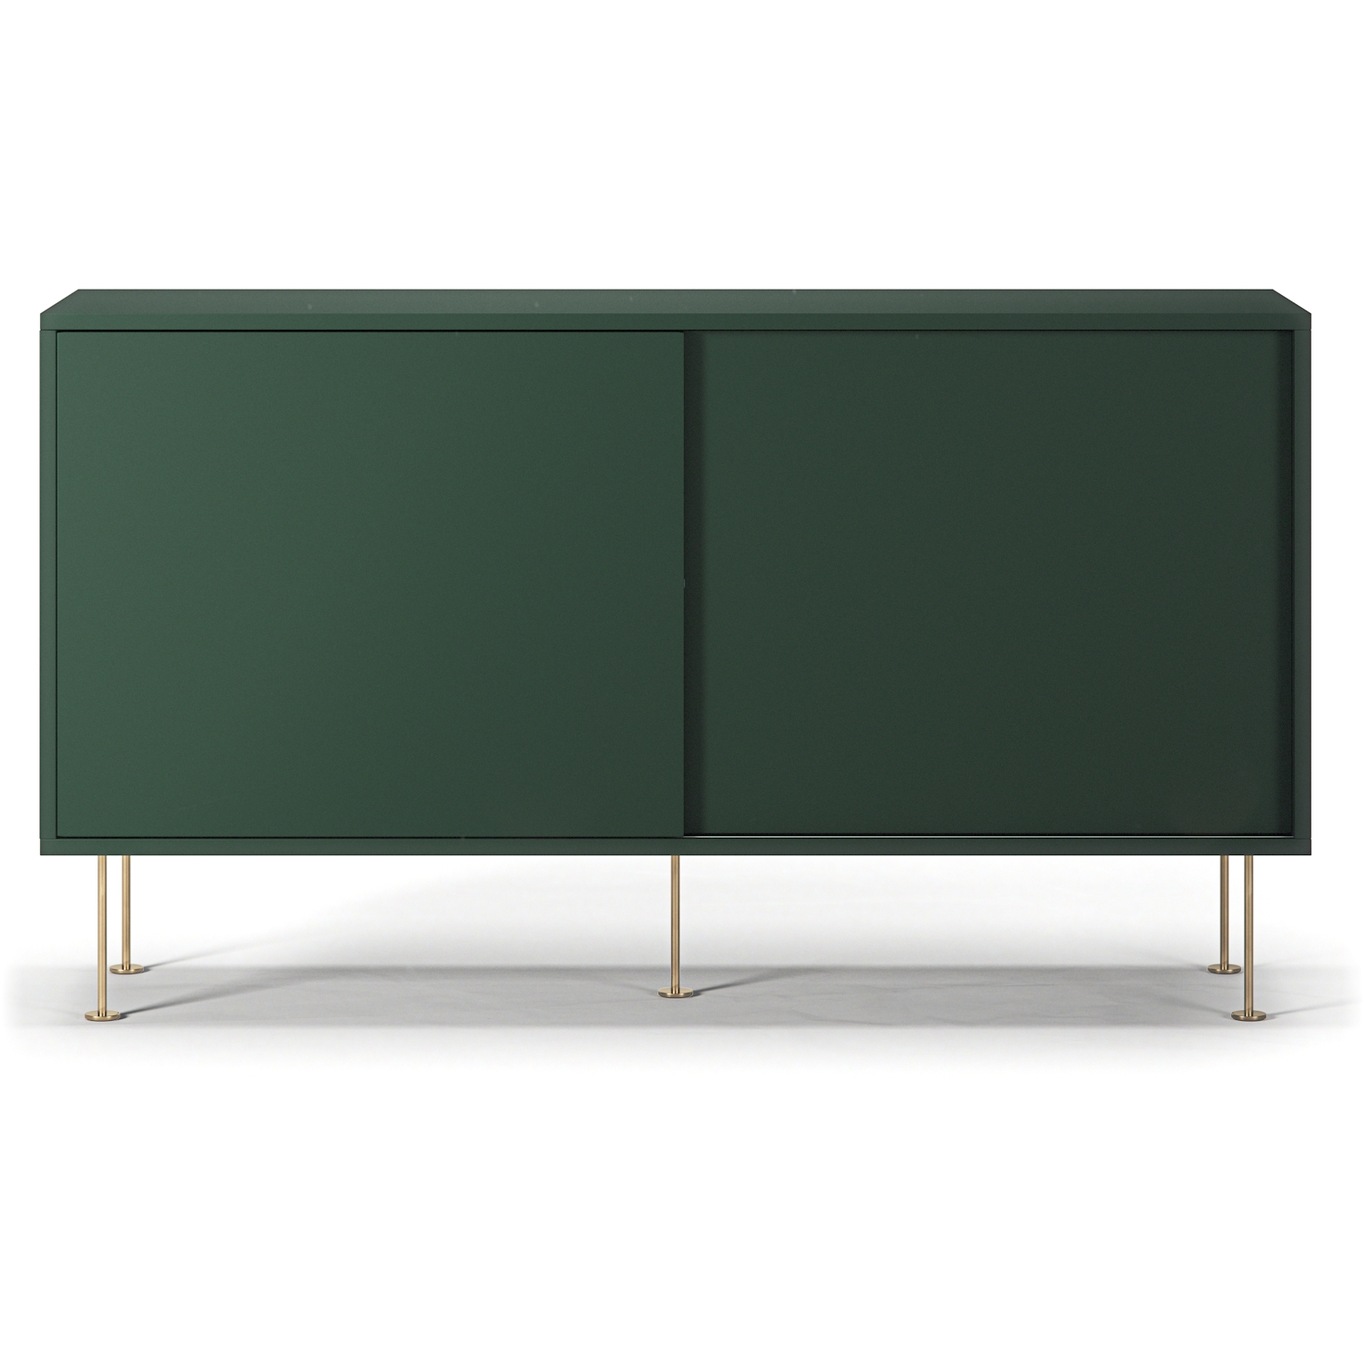 Vogue Side Table With Legs 136 cm, Green / Brass